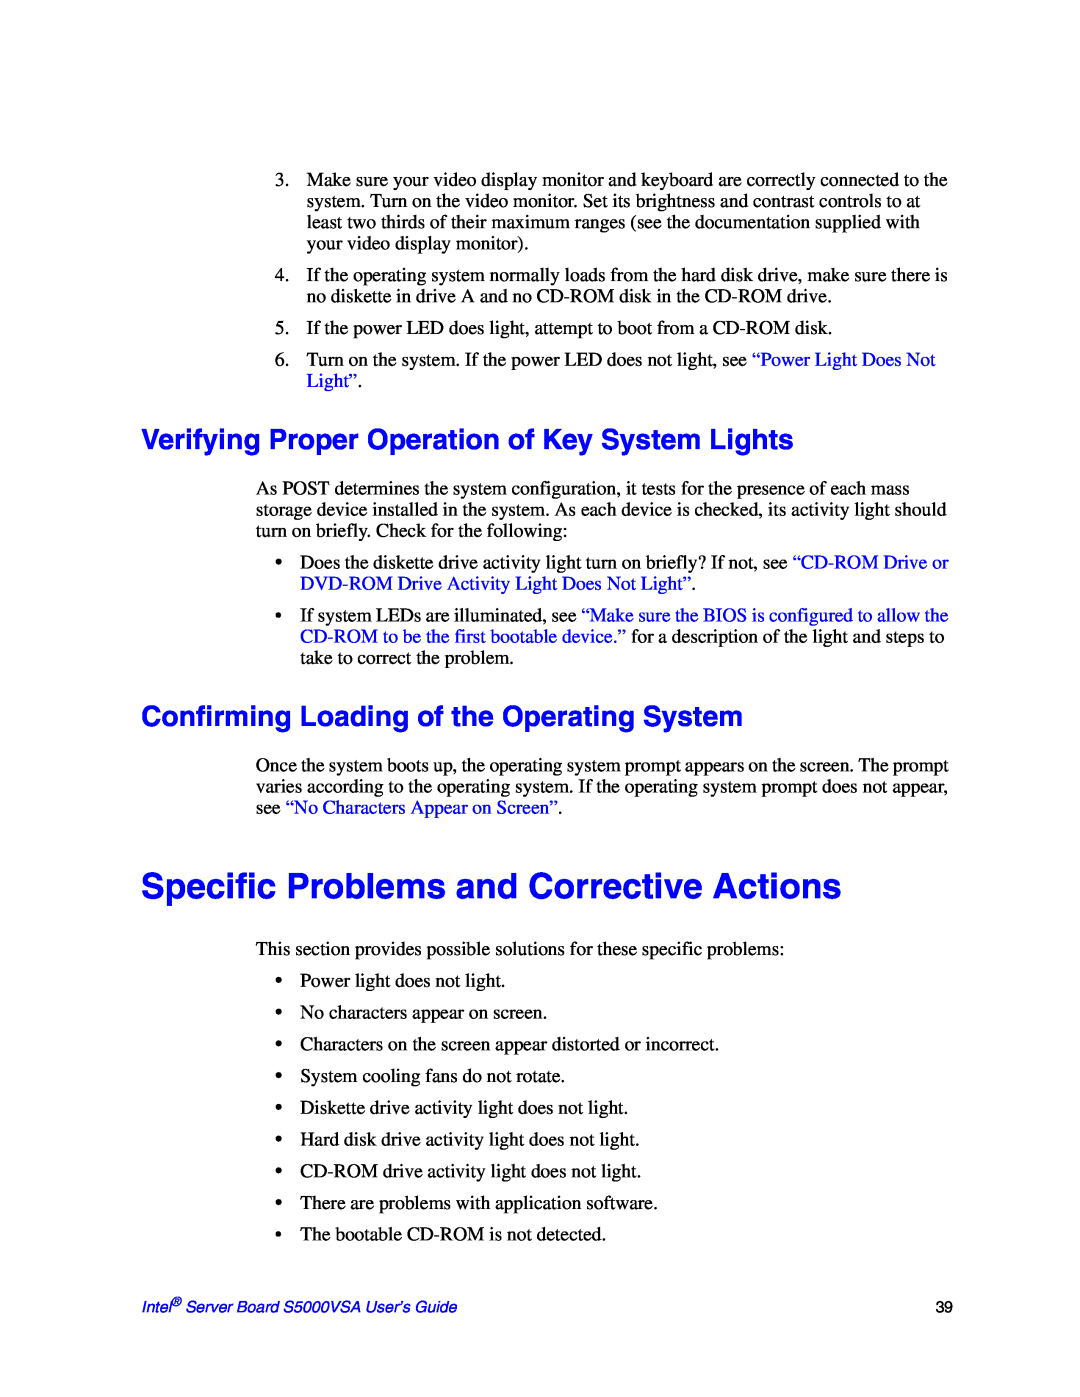 Intel S5000VSA manual Specific Problems and Corrective Actions, Verifying Proper Operation of Key System Lights 